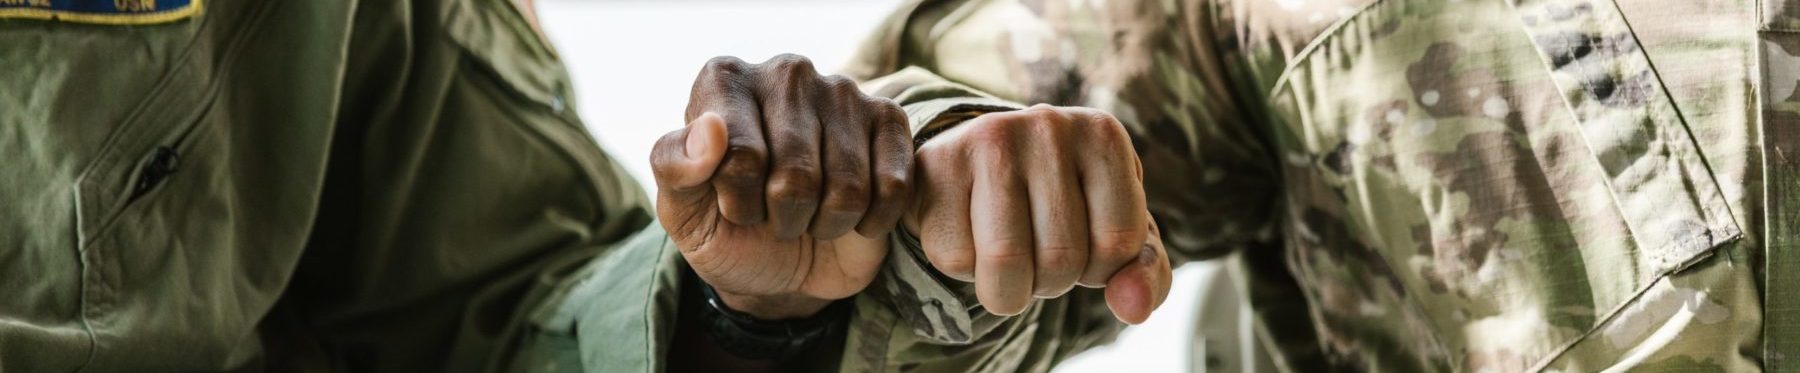 Soldiers fist bumping